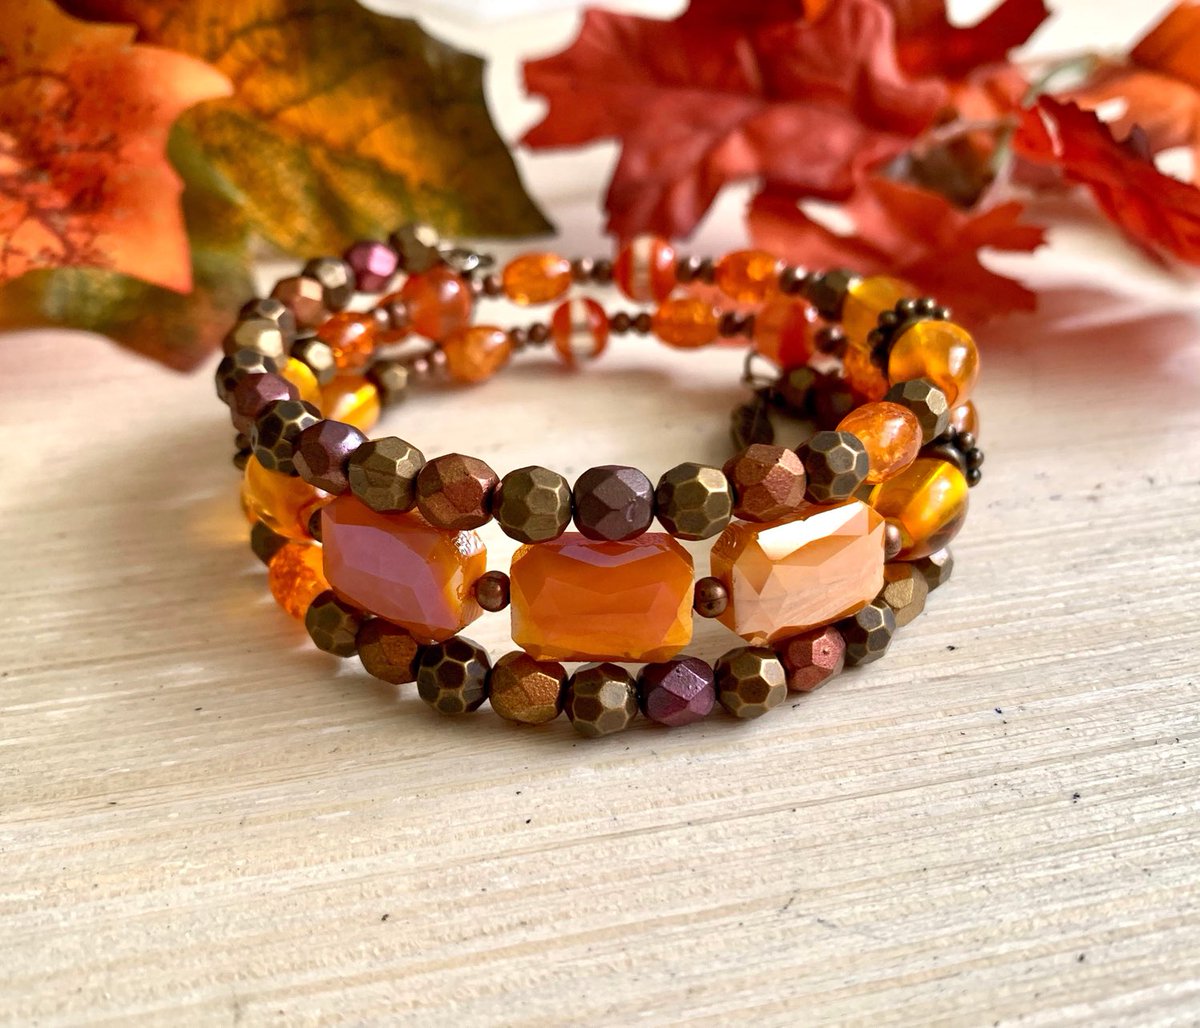 #Kaybejeweled #etsy shop: Orange Rectangle Memory Wire Bracelet - Fall Autumn Jewelry - Rustic Jewelry etsy.me/3eaxP0U #memorybracelet #coilbracelet #autumnjewelry #falljewelry #rusticjewelry #orangebracelet #Kaybejeweled